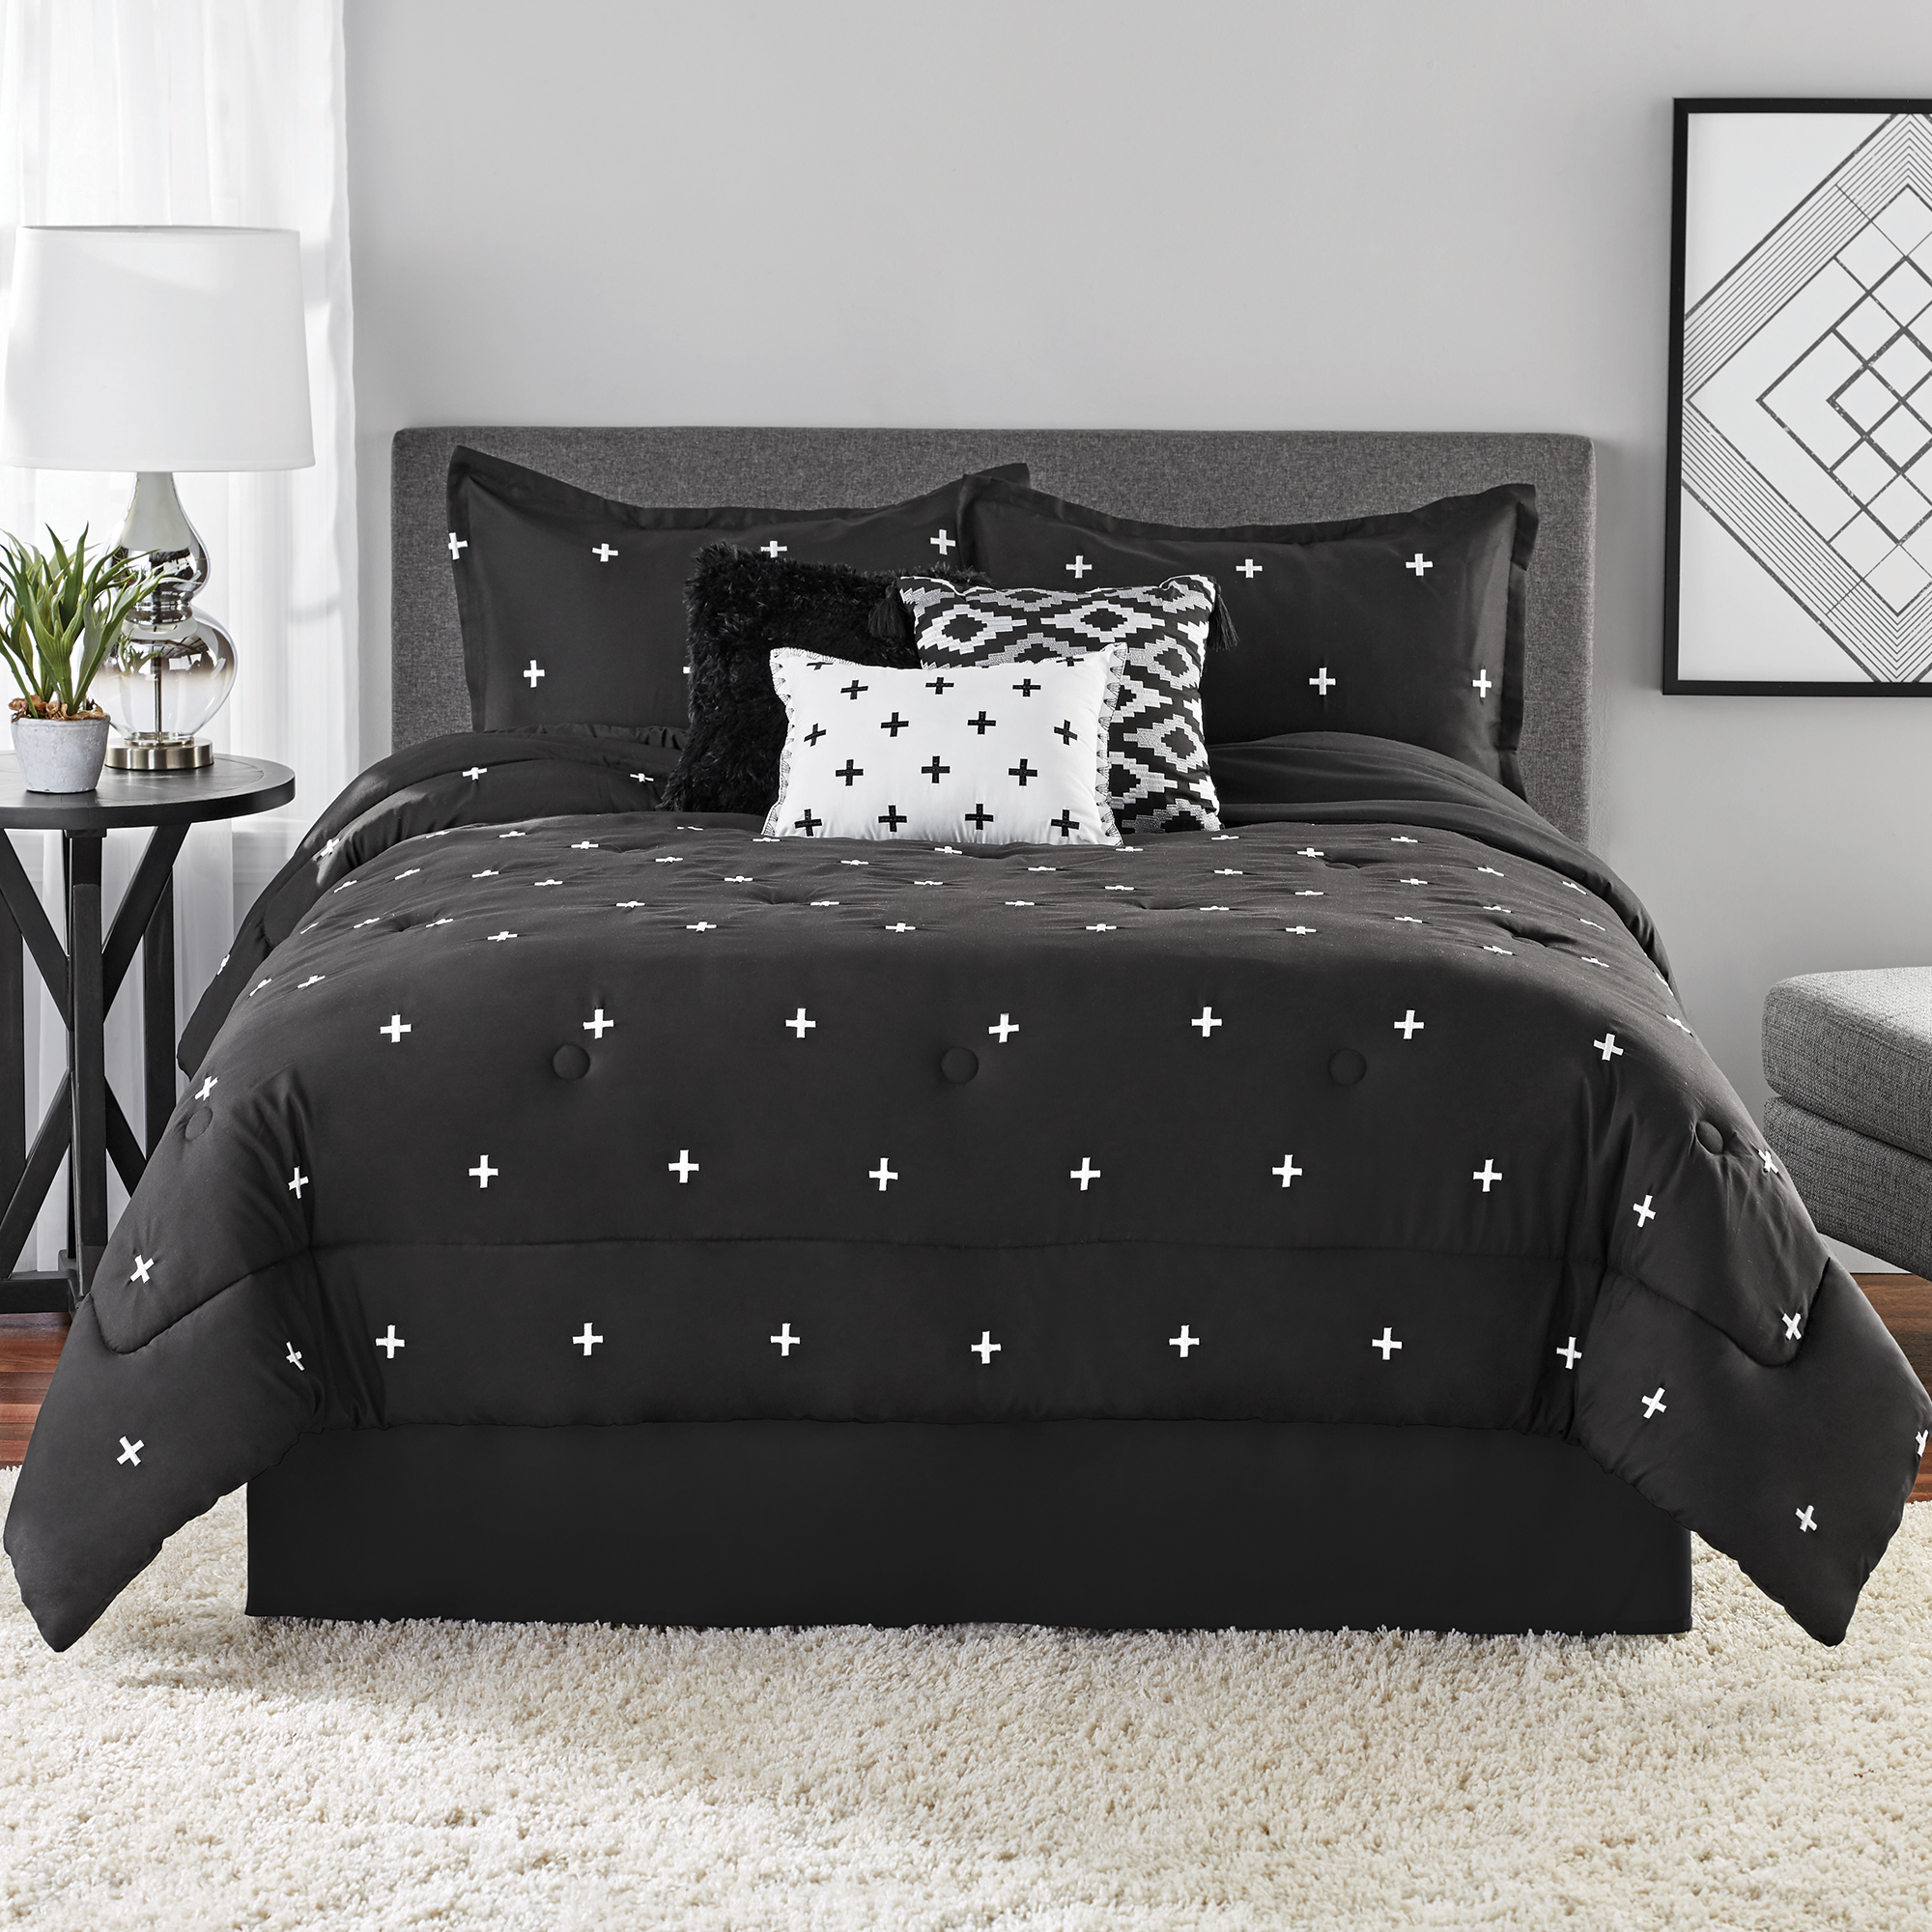 Mainstays 7-Piece Black Embroidered Comforter Bedding Set, Full/Queen - image 1 of 6